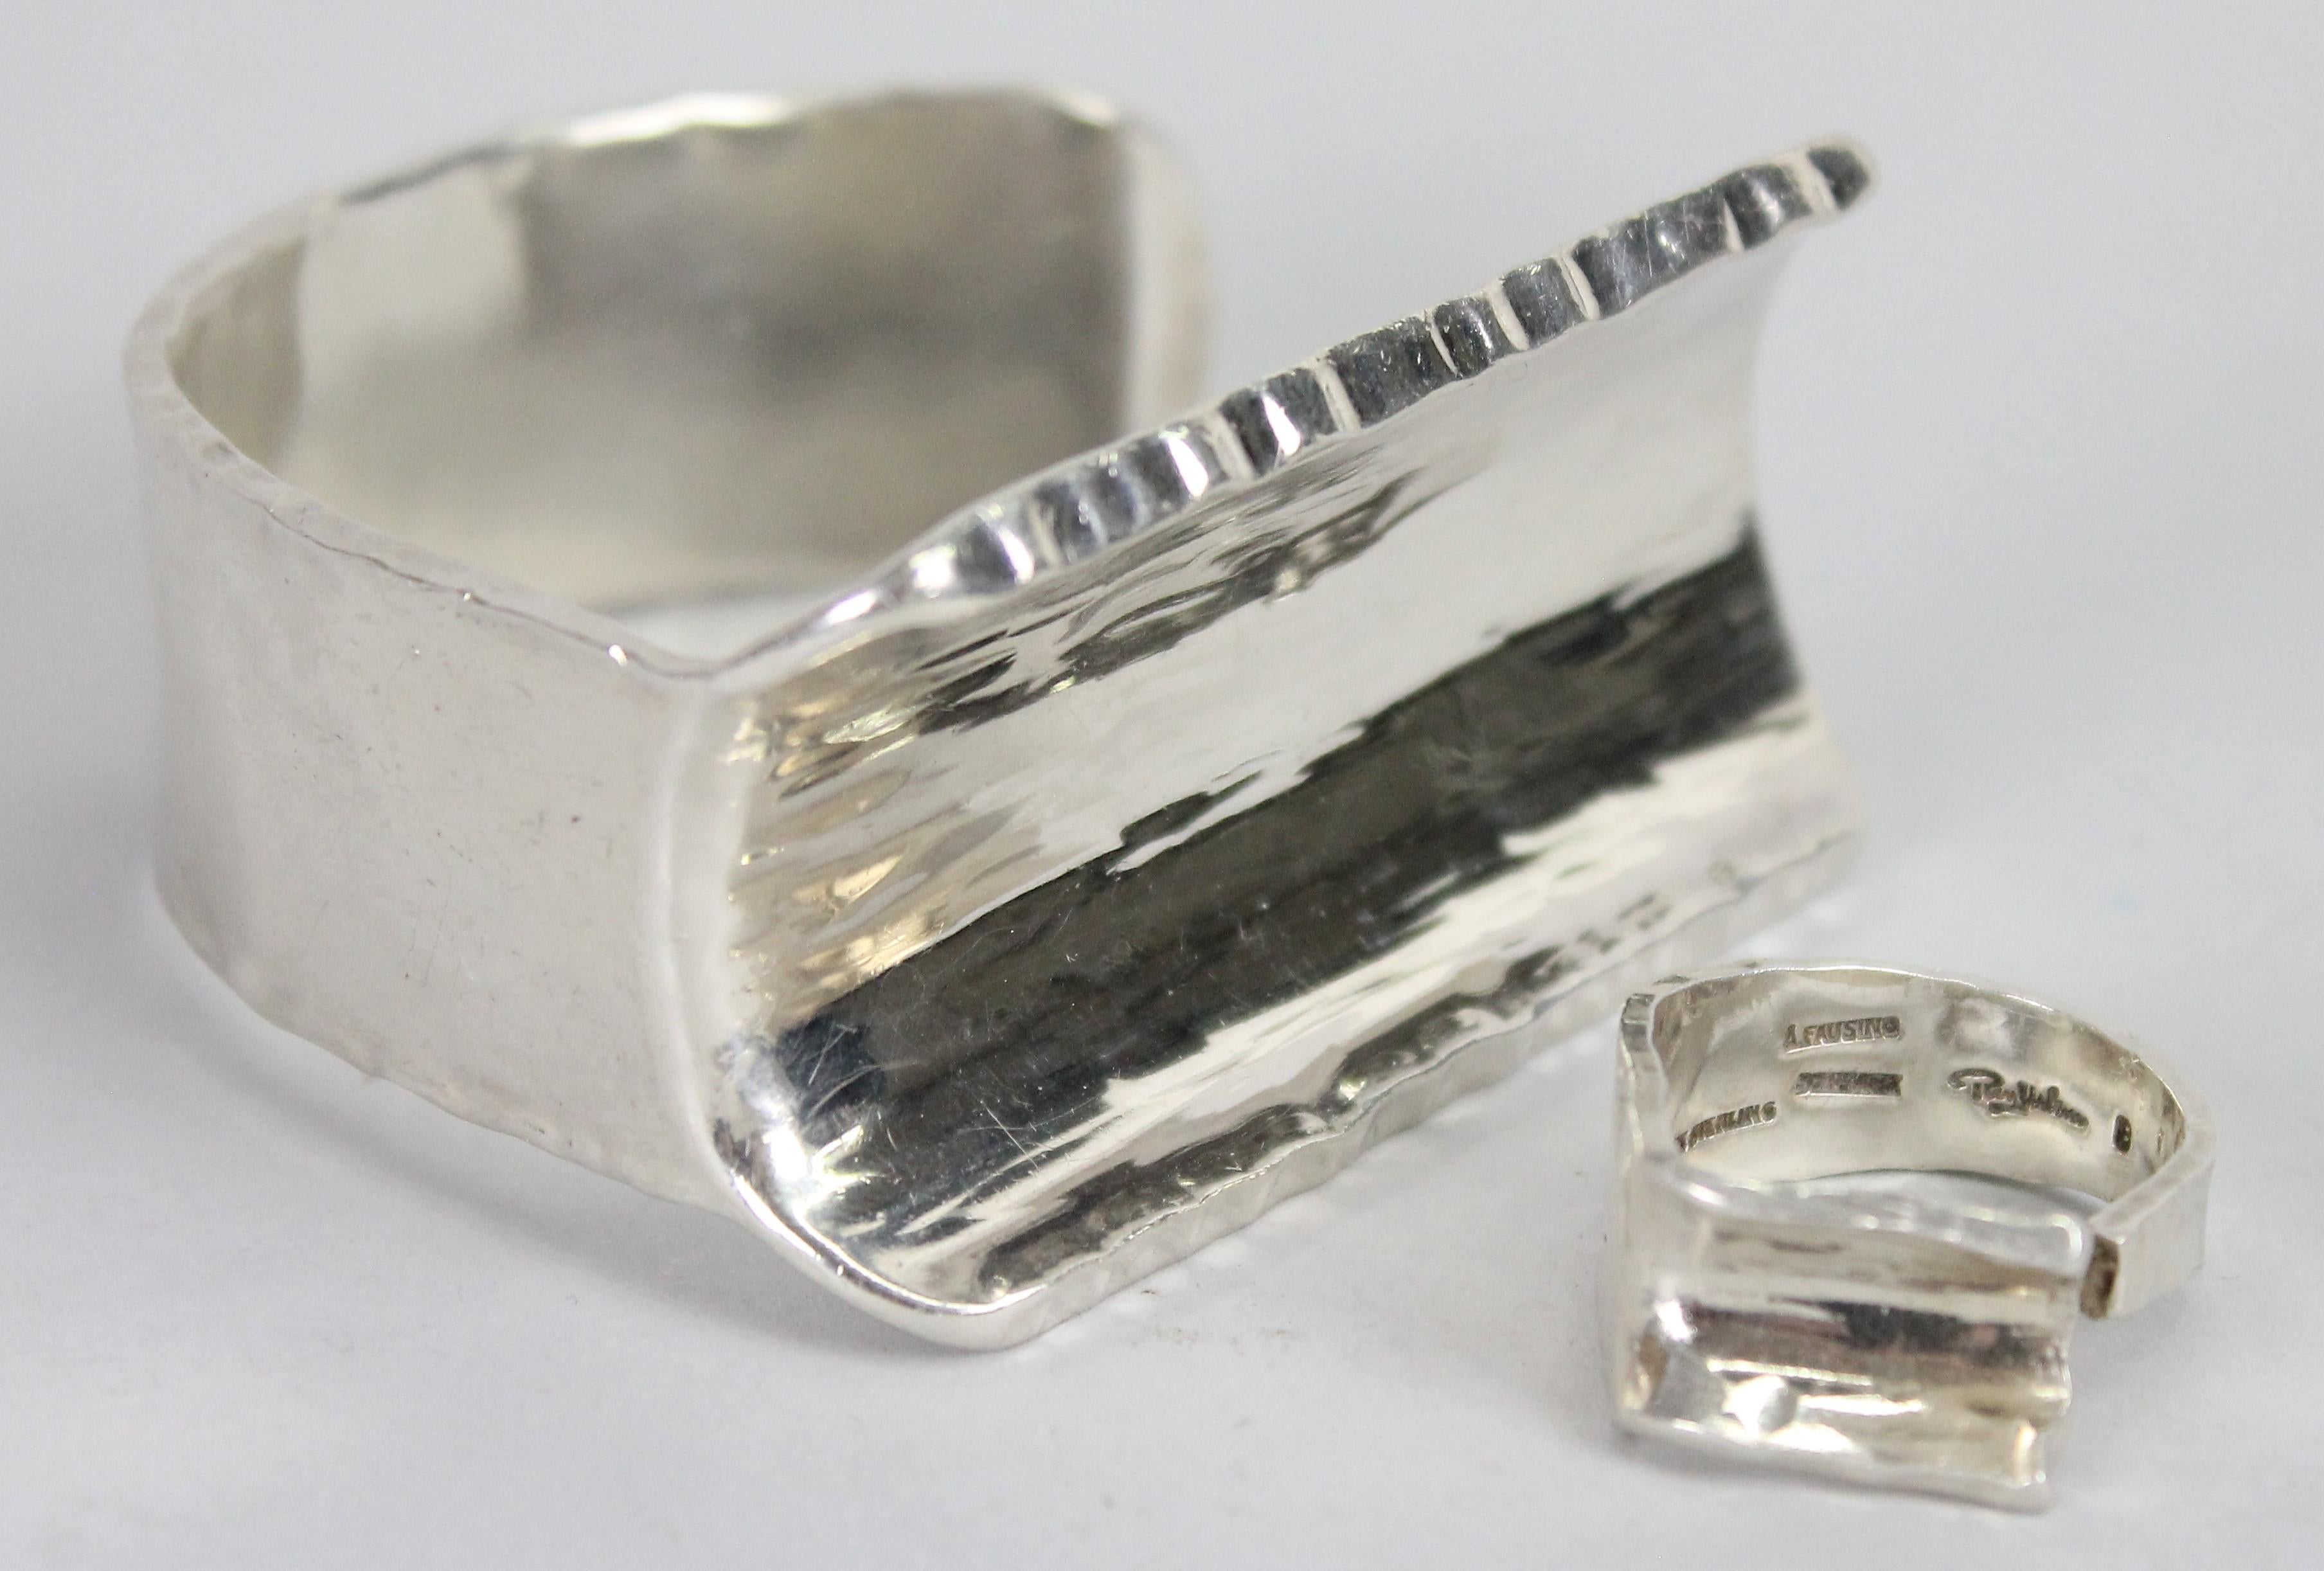 A very nice set of a modernist bracelet and a ring made in hammered sterling silver.

Very good condition and fully marked (see image).

Both ring and bracelet are adjustable. The bracelet is 6cm (2.36in) wide, the ring 1.6cm (0.63in) wide.

Rey